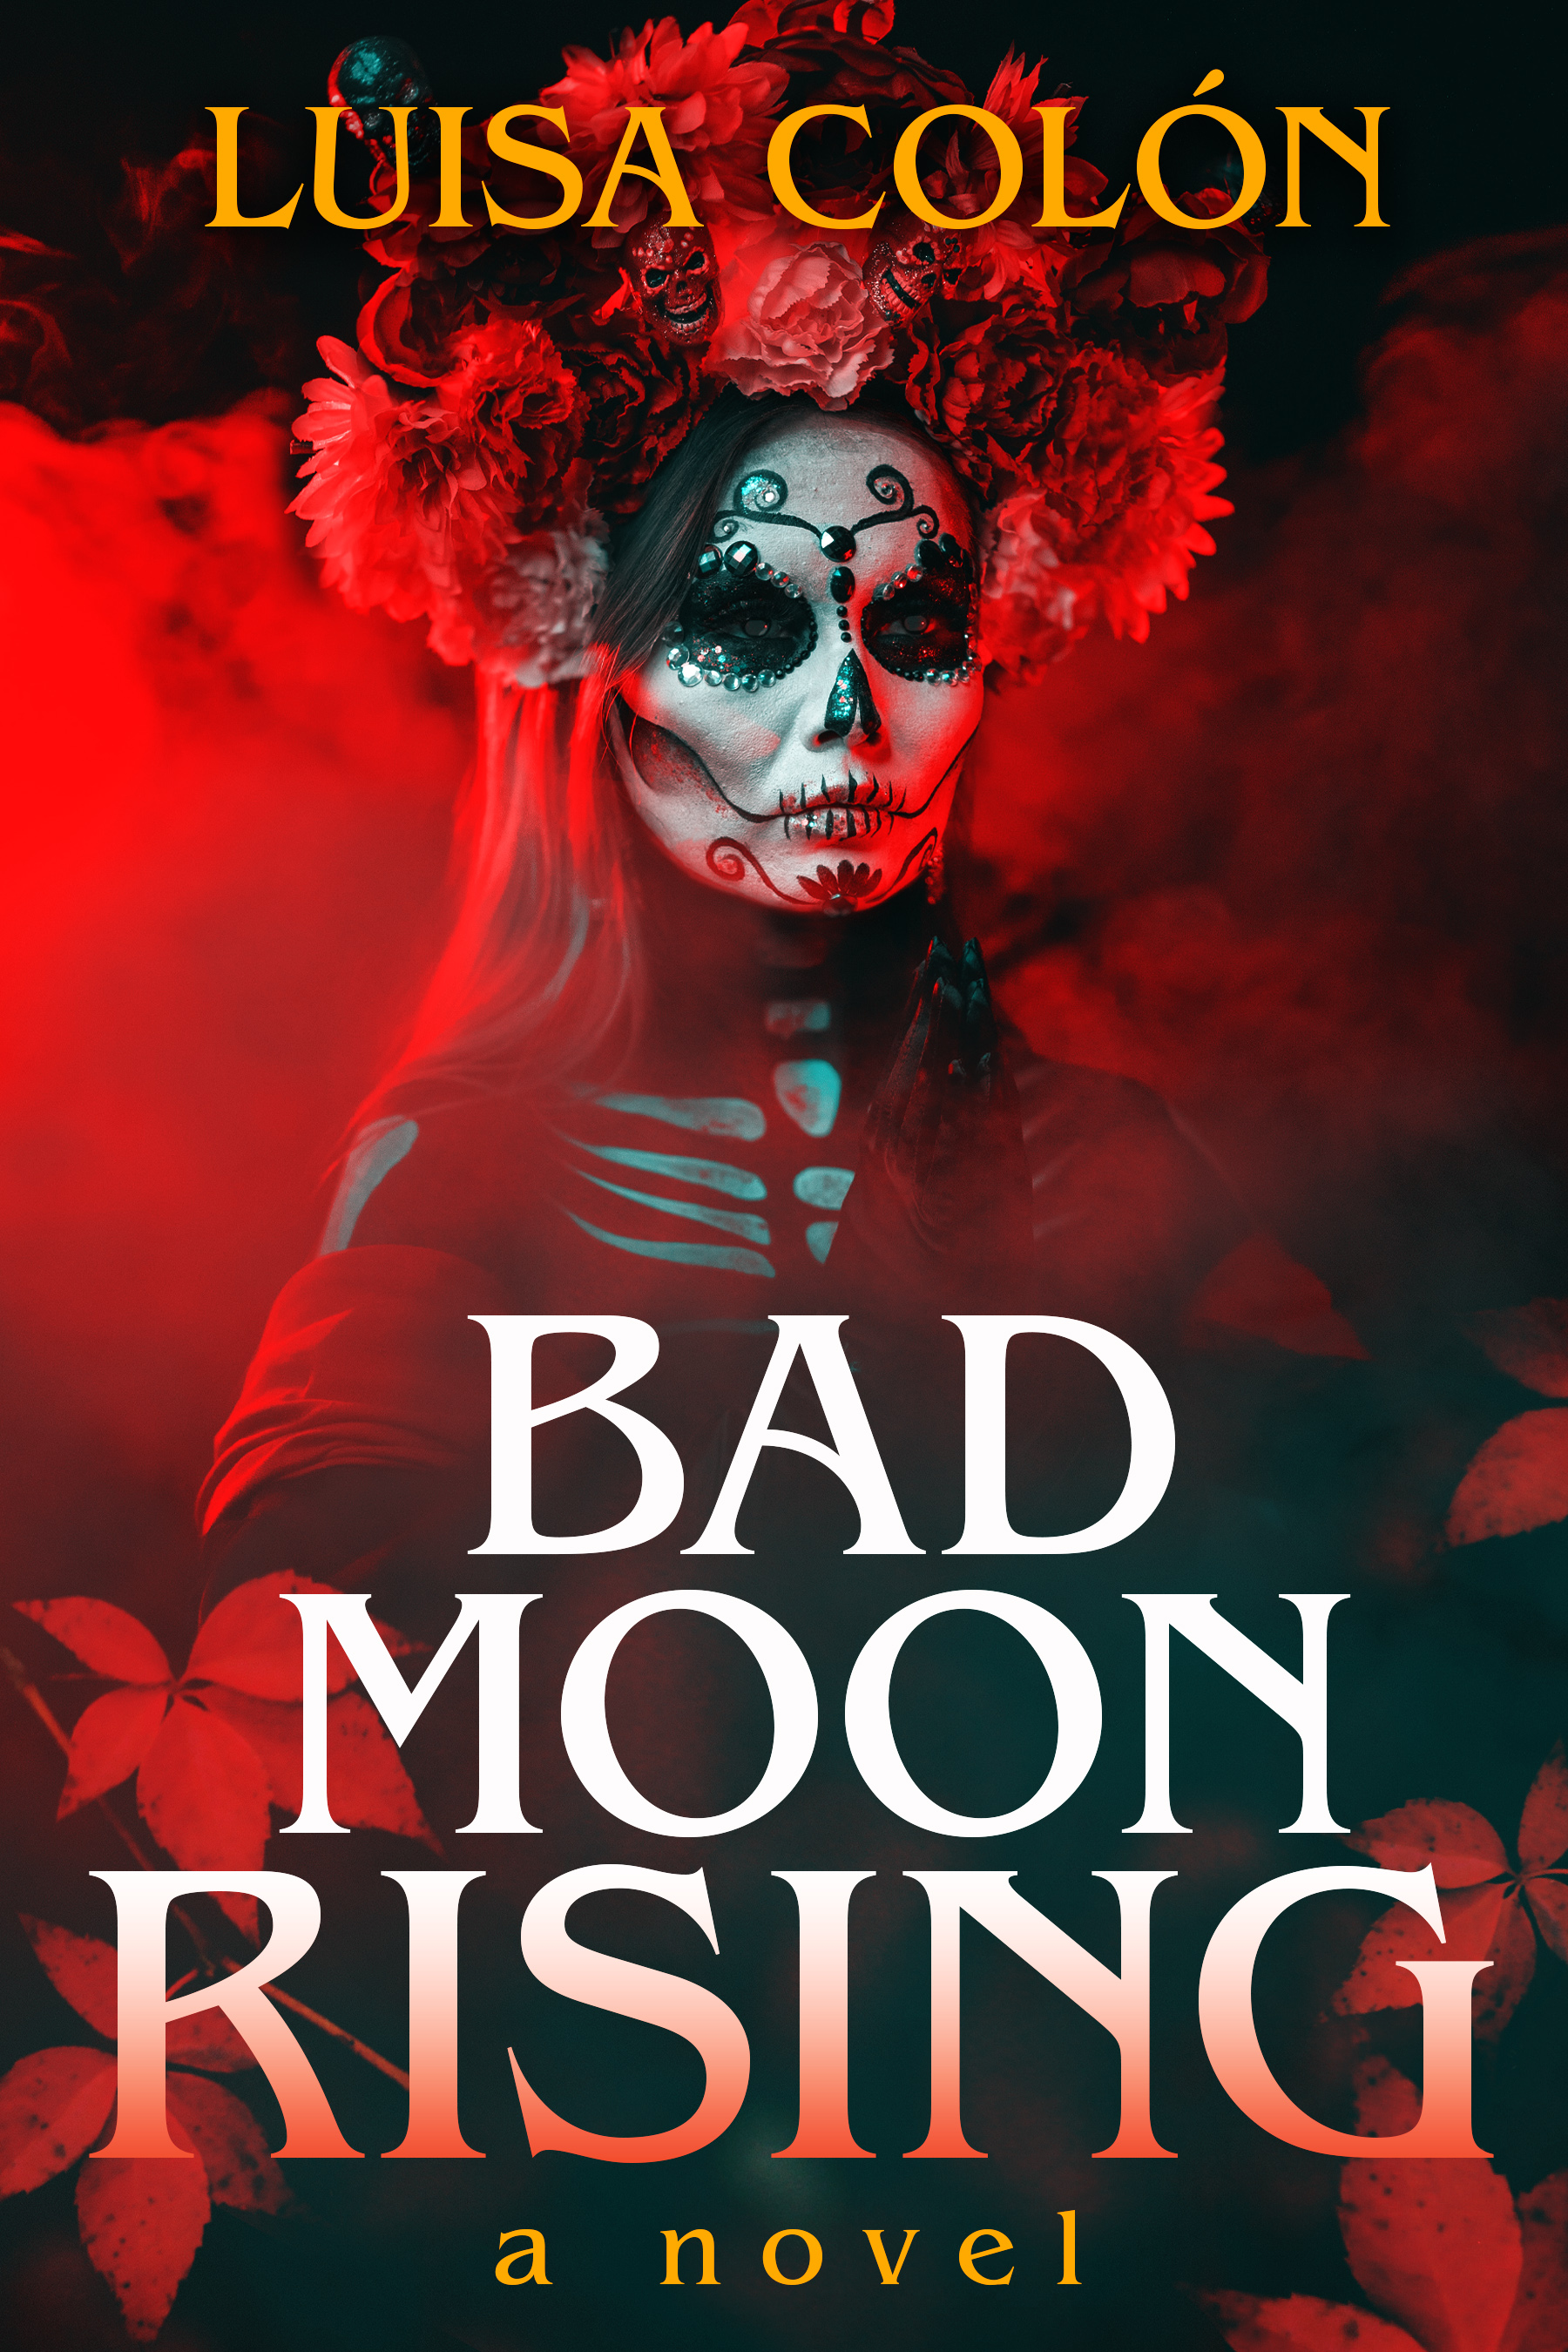 middag Spectacle kaos Bad Moon Rising, by Luisa Colon: Cemetery Dance Publications